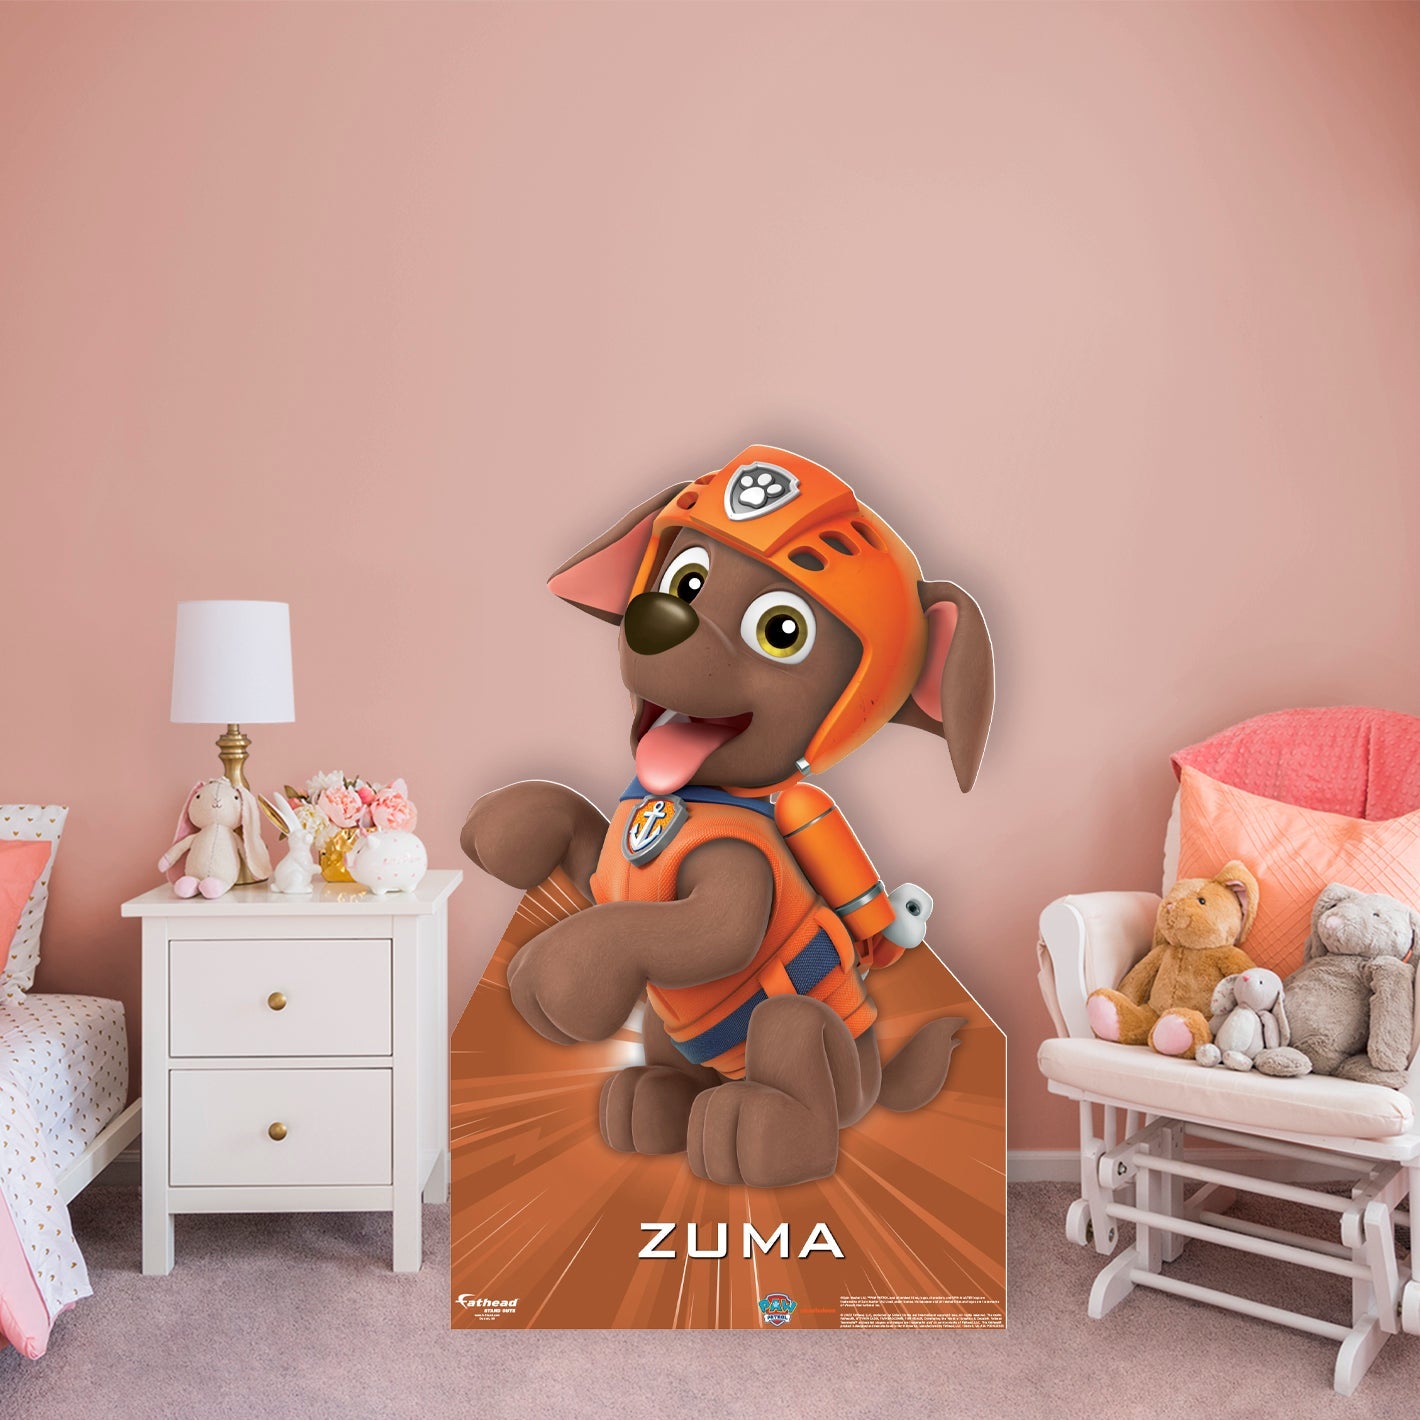 Paw Patrol: Zuma Life-Size Foam Core Cutout - Officially Licensed Nickelodeon Stand Out